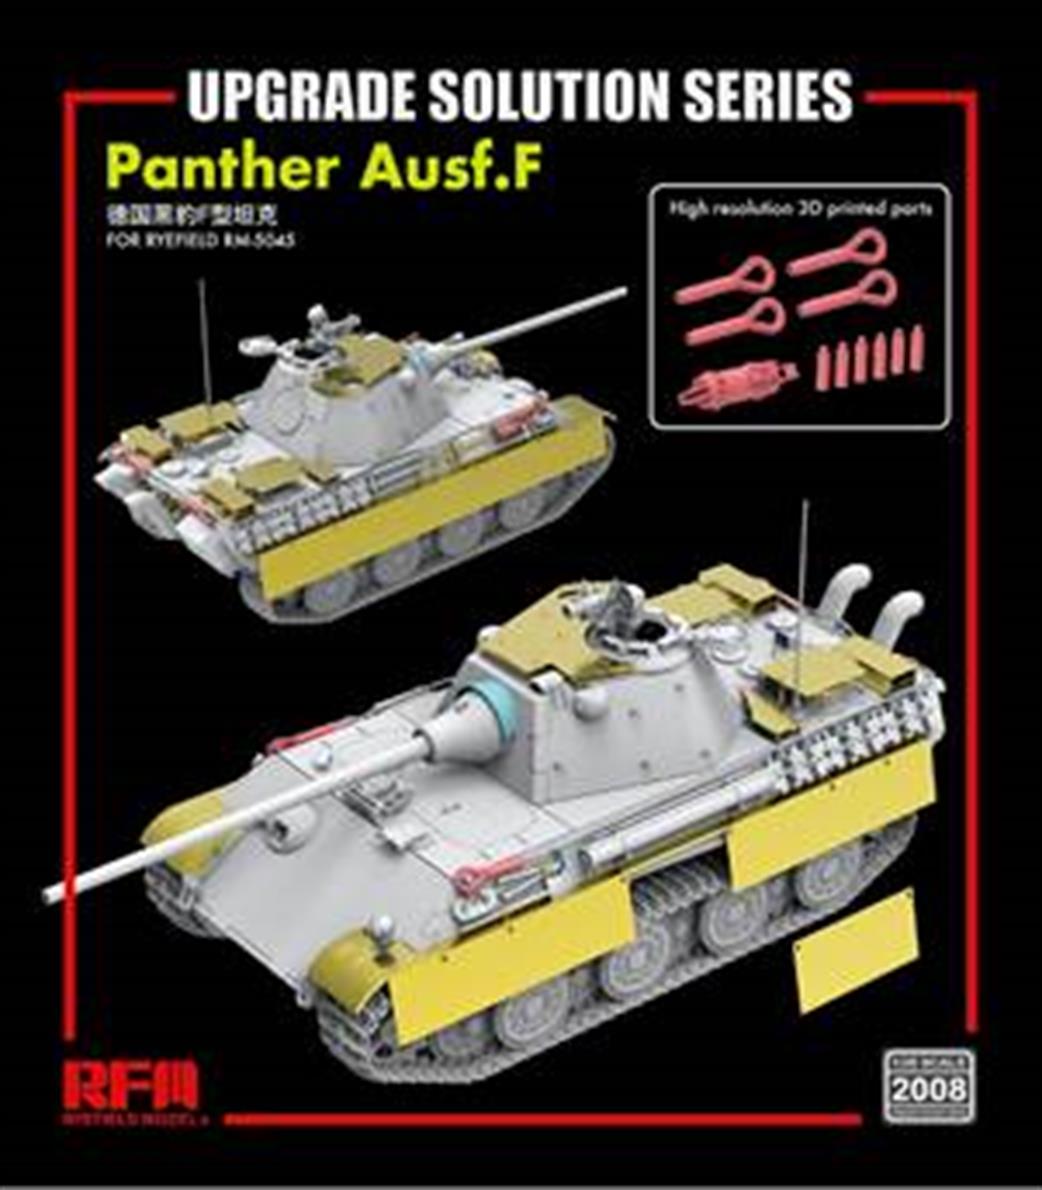 Rye Field Model 1/35 RM2008 Upgrade Solution for Panther Ausf.F Including 11 high resolution 3D printed parts